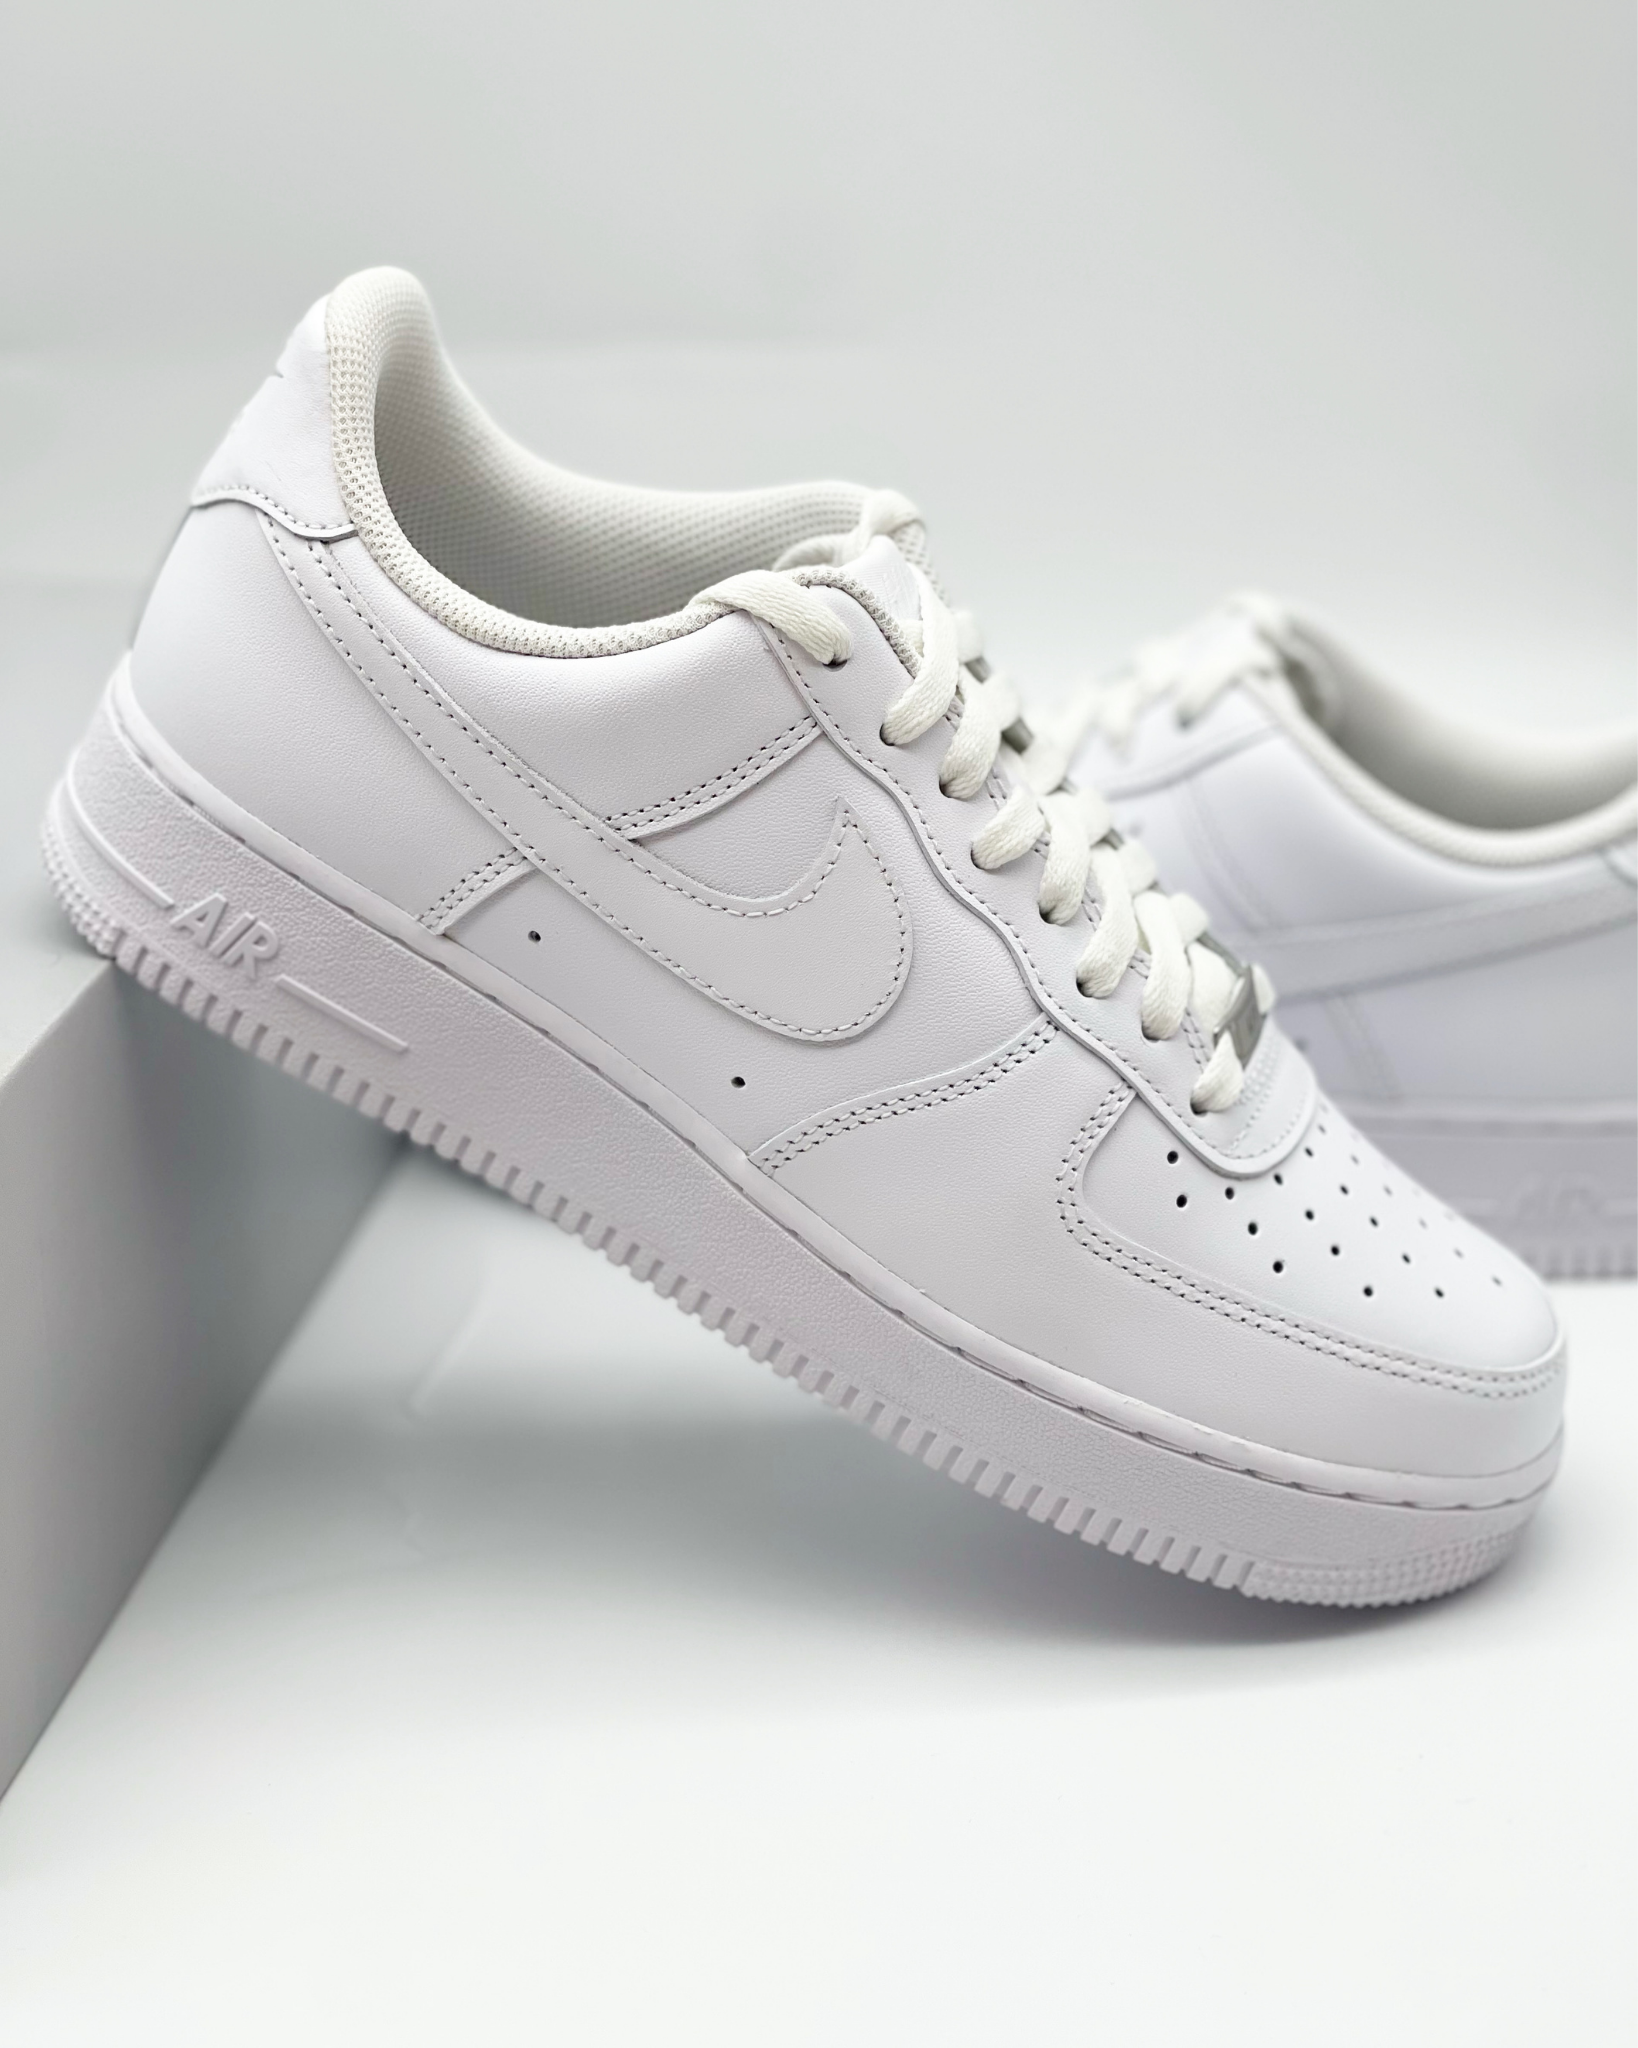 Apgs-nswShops - mens nike suede high tops sneakers cutouts - WHITE x Nike  Air Force 1 - First Look at the OFF